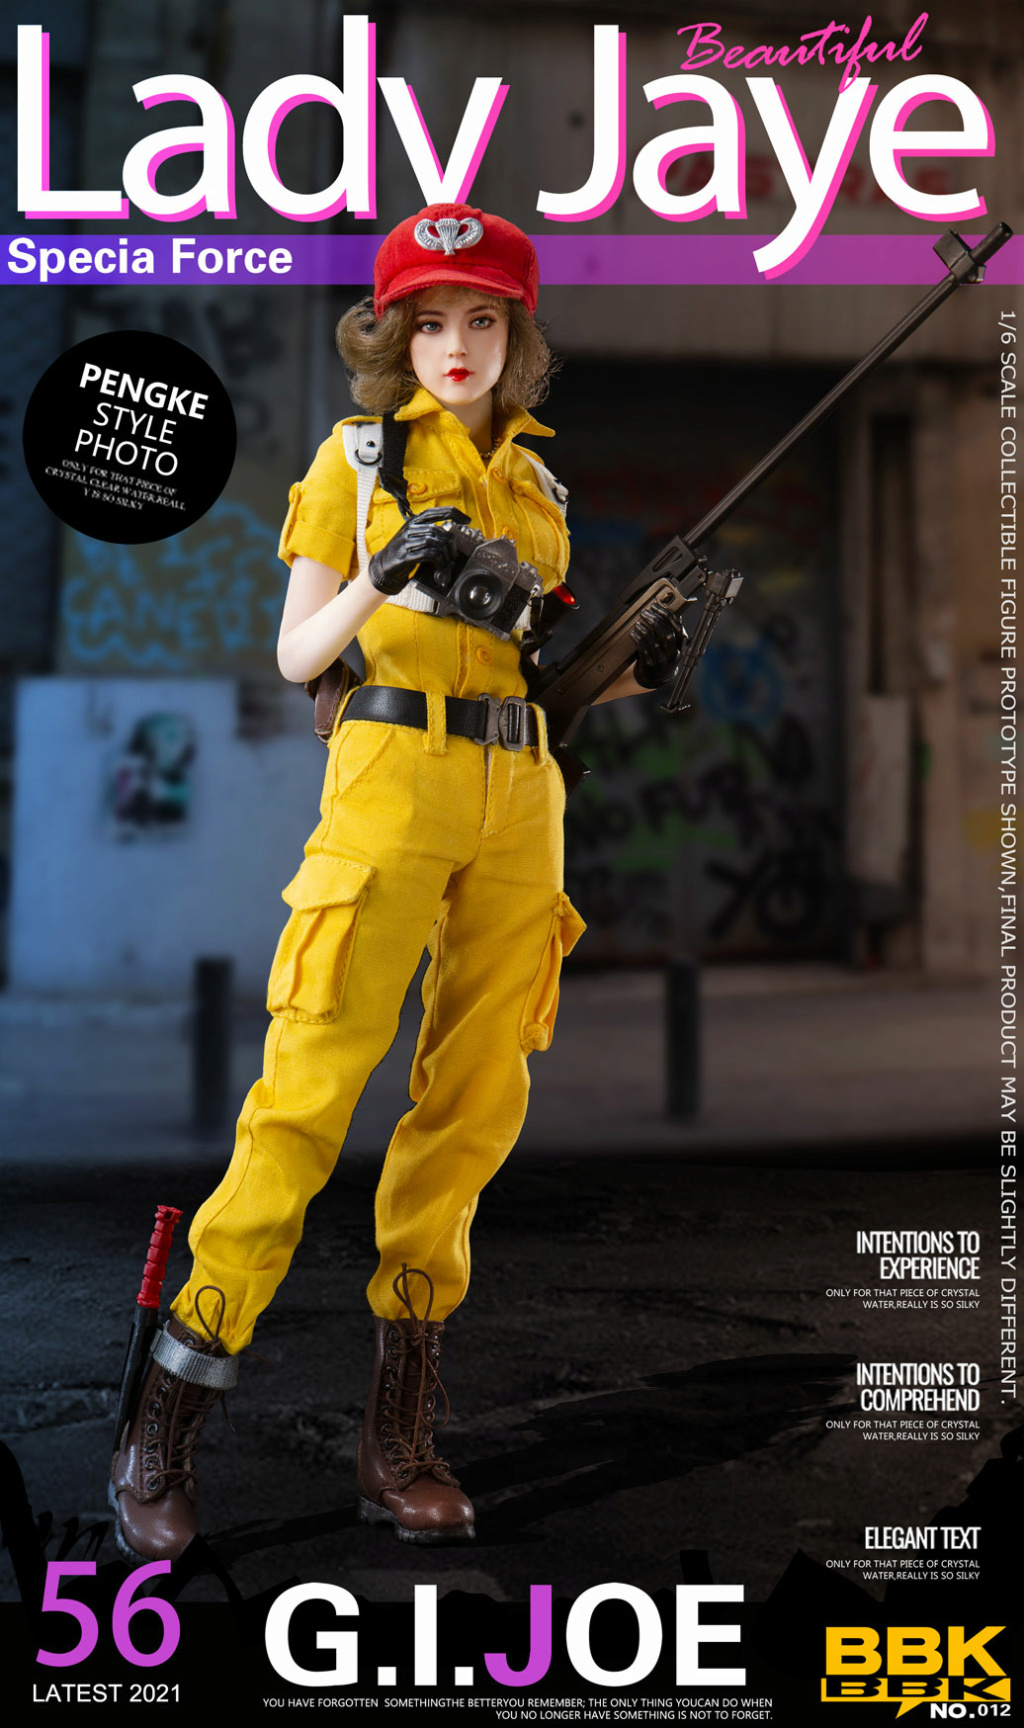 GIJoeJay - NEW PRODUCT: BBK: 1/6 GIJOE Jay Female Soldier Action Figure# 14575711